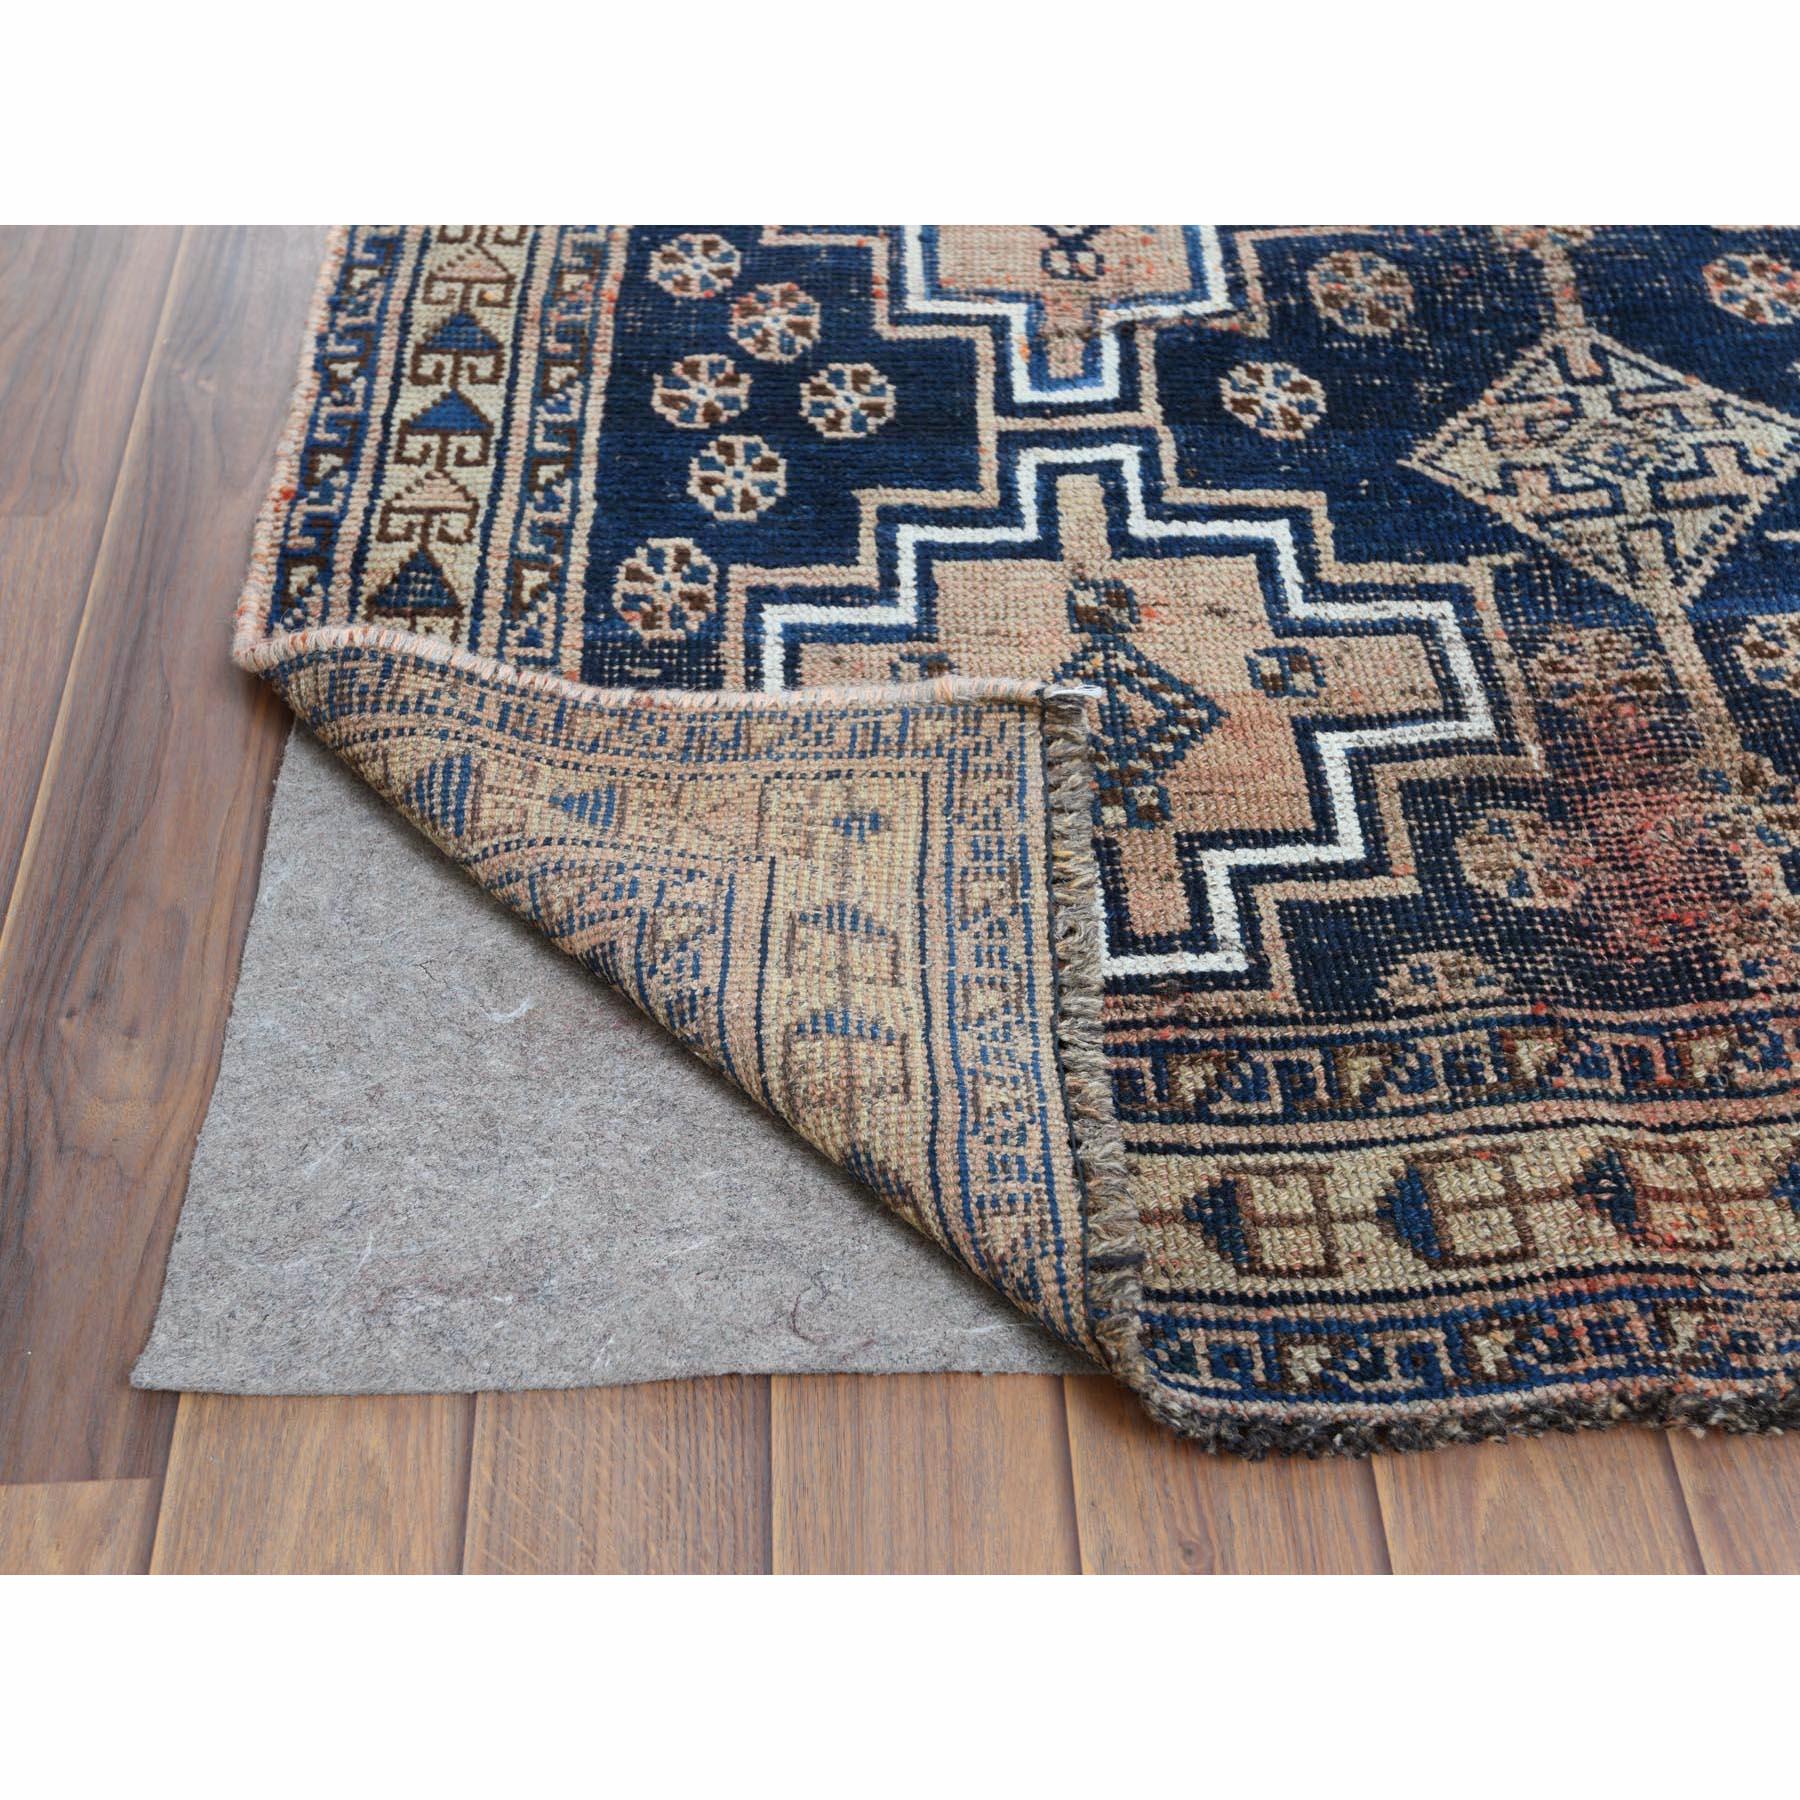 Medieval Navy Blue Vintage Worn Down Persian Qashqai Clean Hand Knotted Natural Wool Rug For Sale